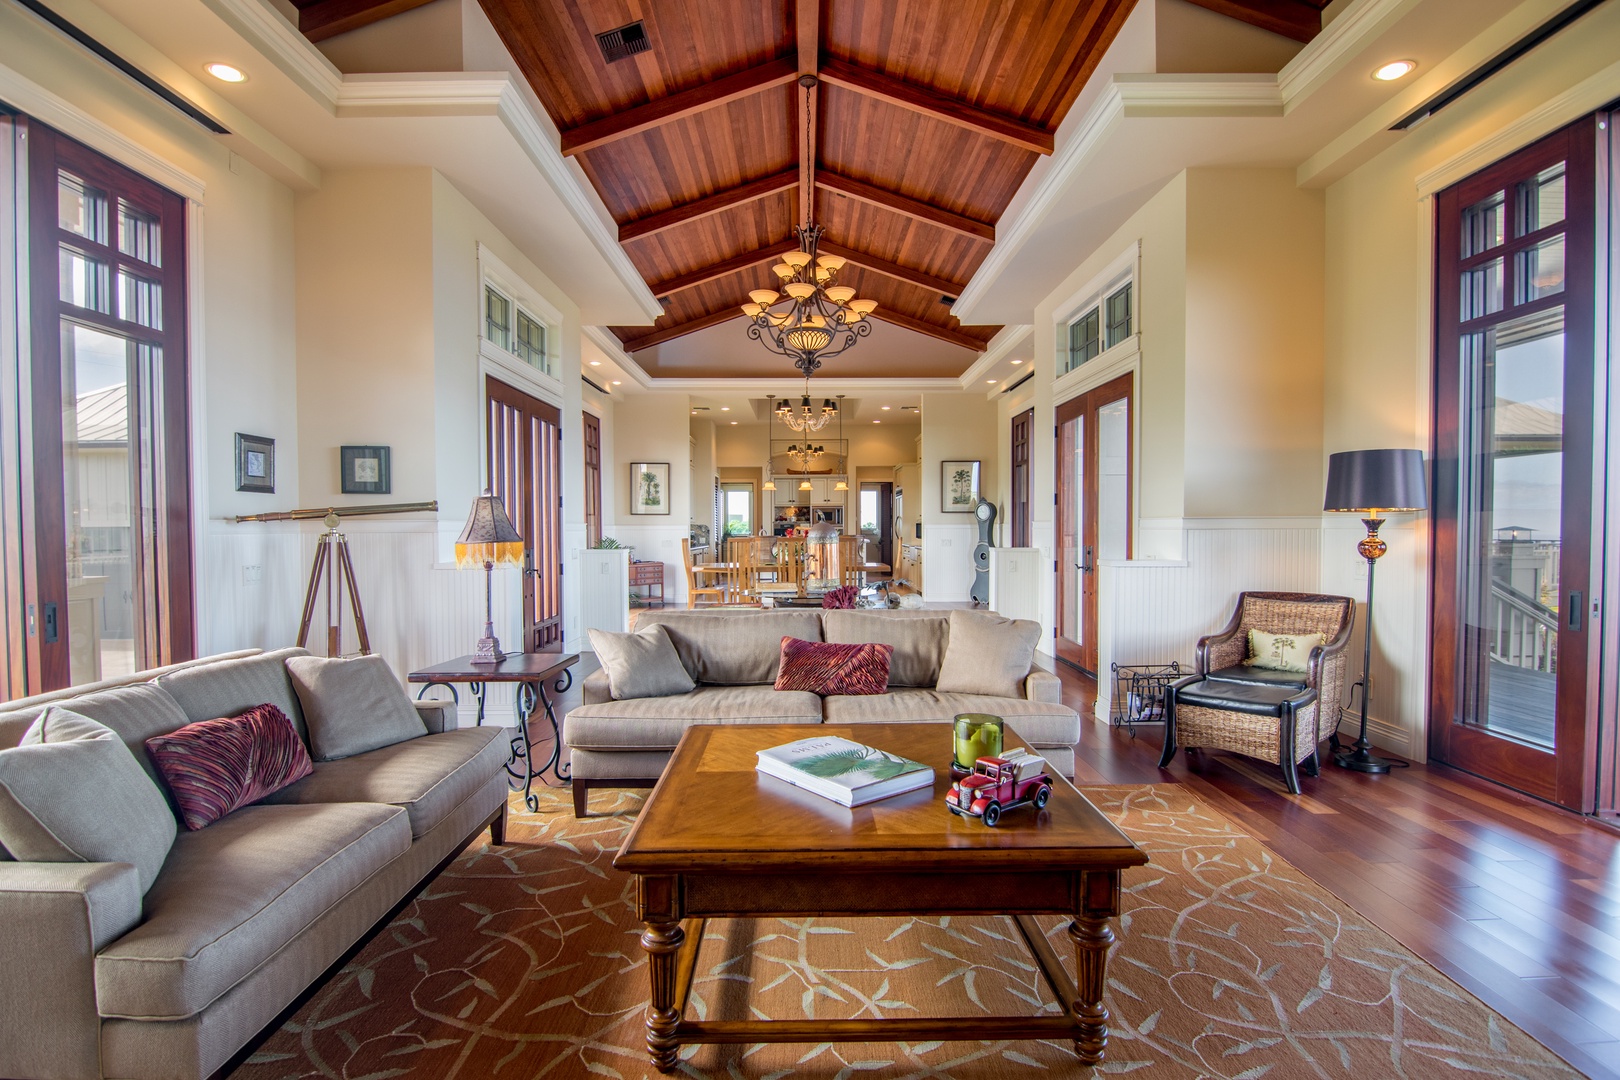 Lahaina Vacation Rentals, Rainbow Hale Estate* - View from Living Room to Dining Room